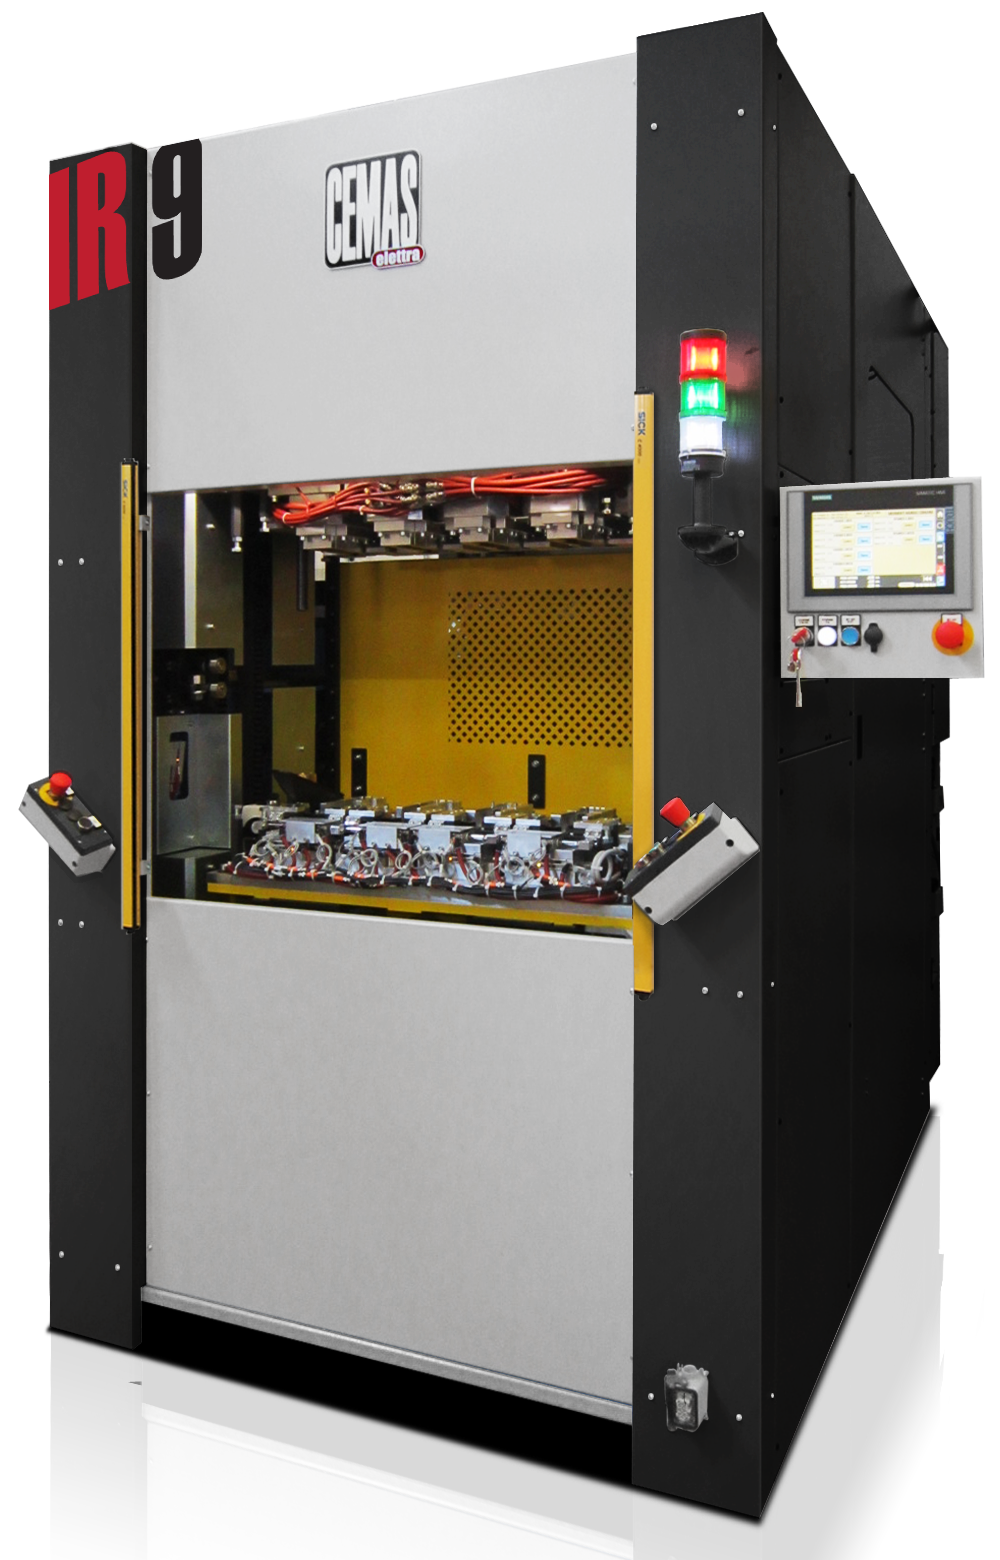 UK Suppliers of Highly Reliable Hotplate Welding Machines